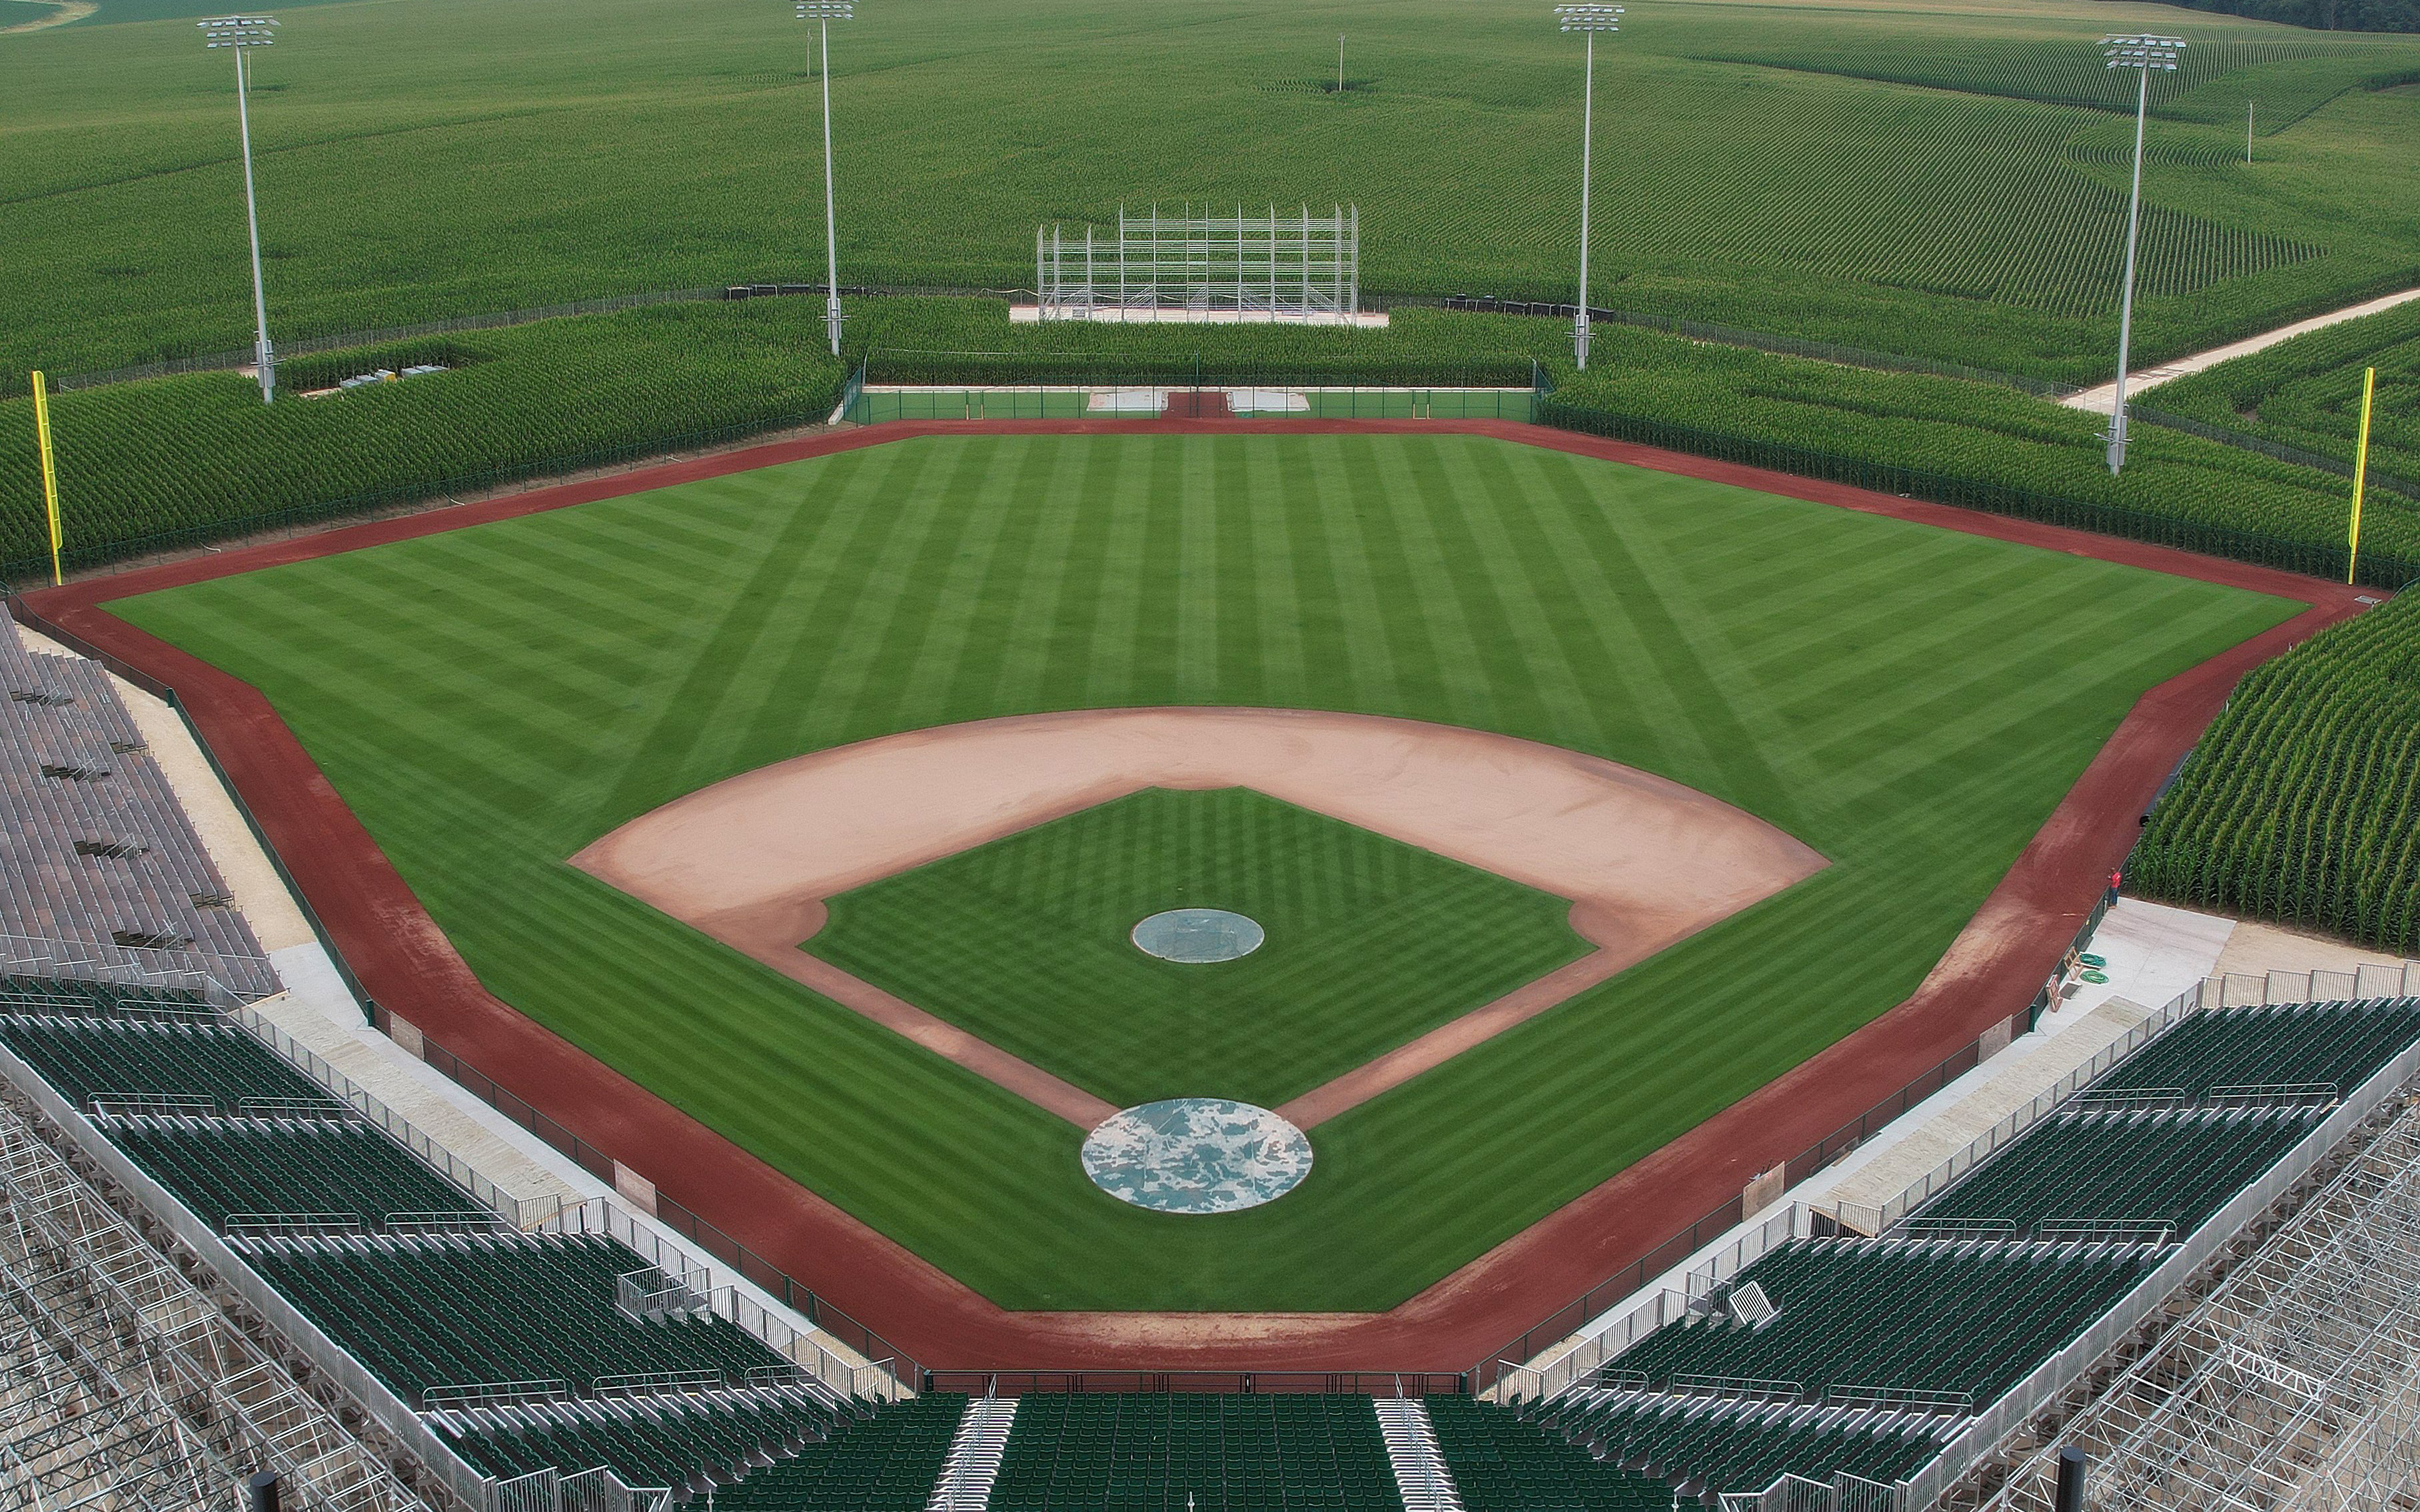 Apparently Thursday's “Field of Dreams” game will be the most expensive  regular-season baseball game in American history, This is the Loop